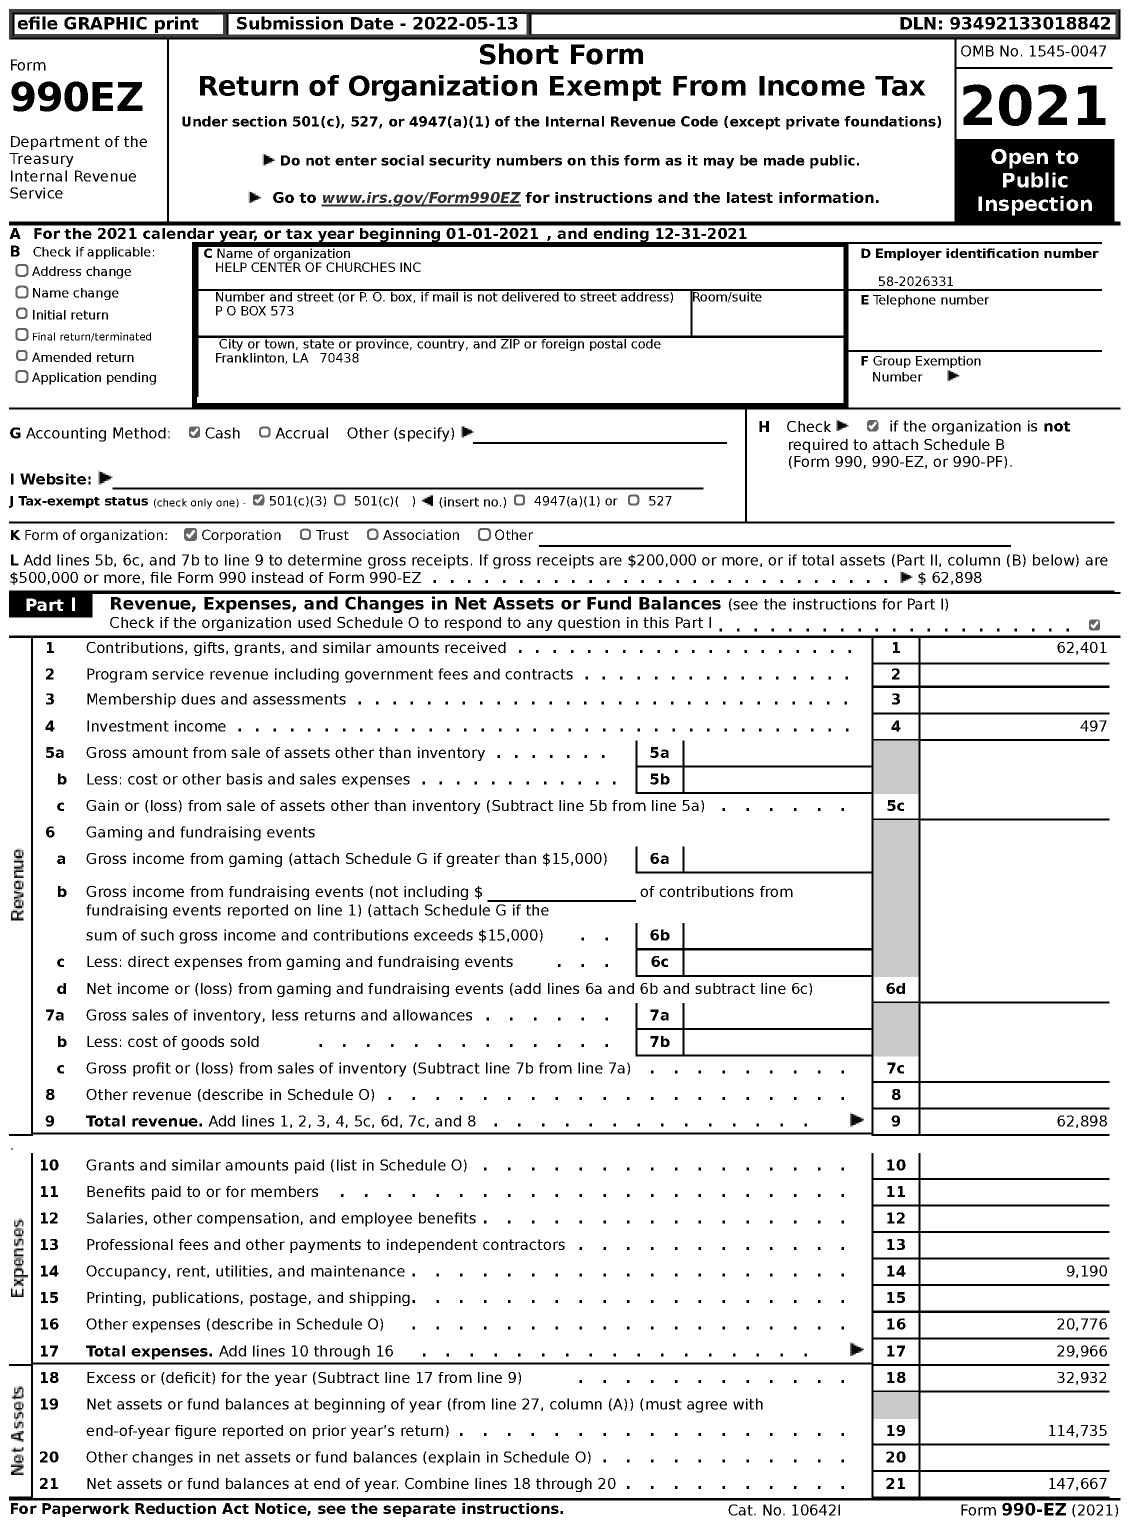 Image of first page of 2021 Form 990EZ for Help Center of Churches